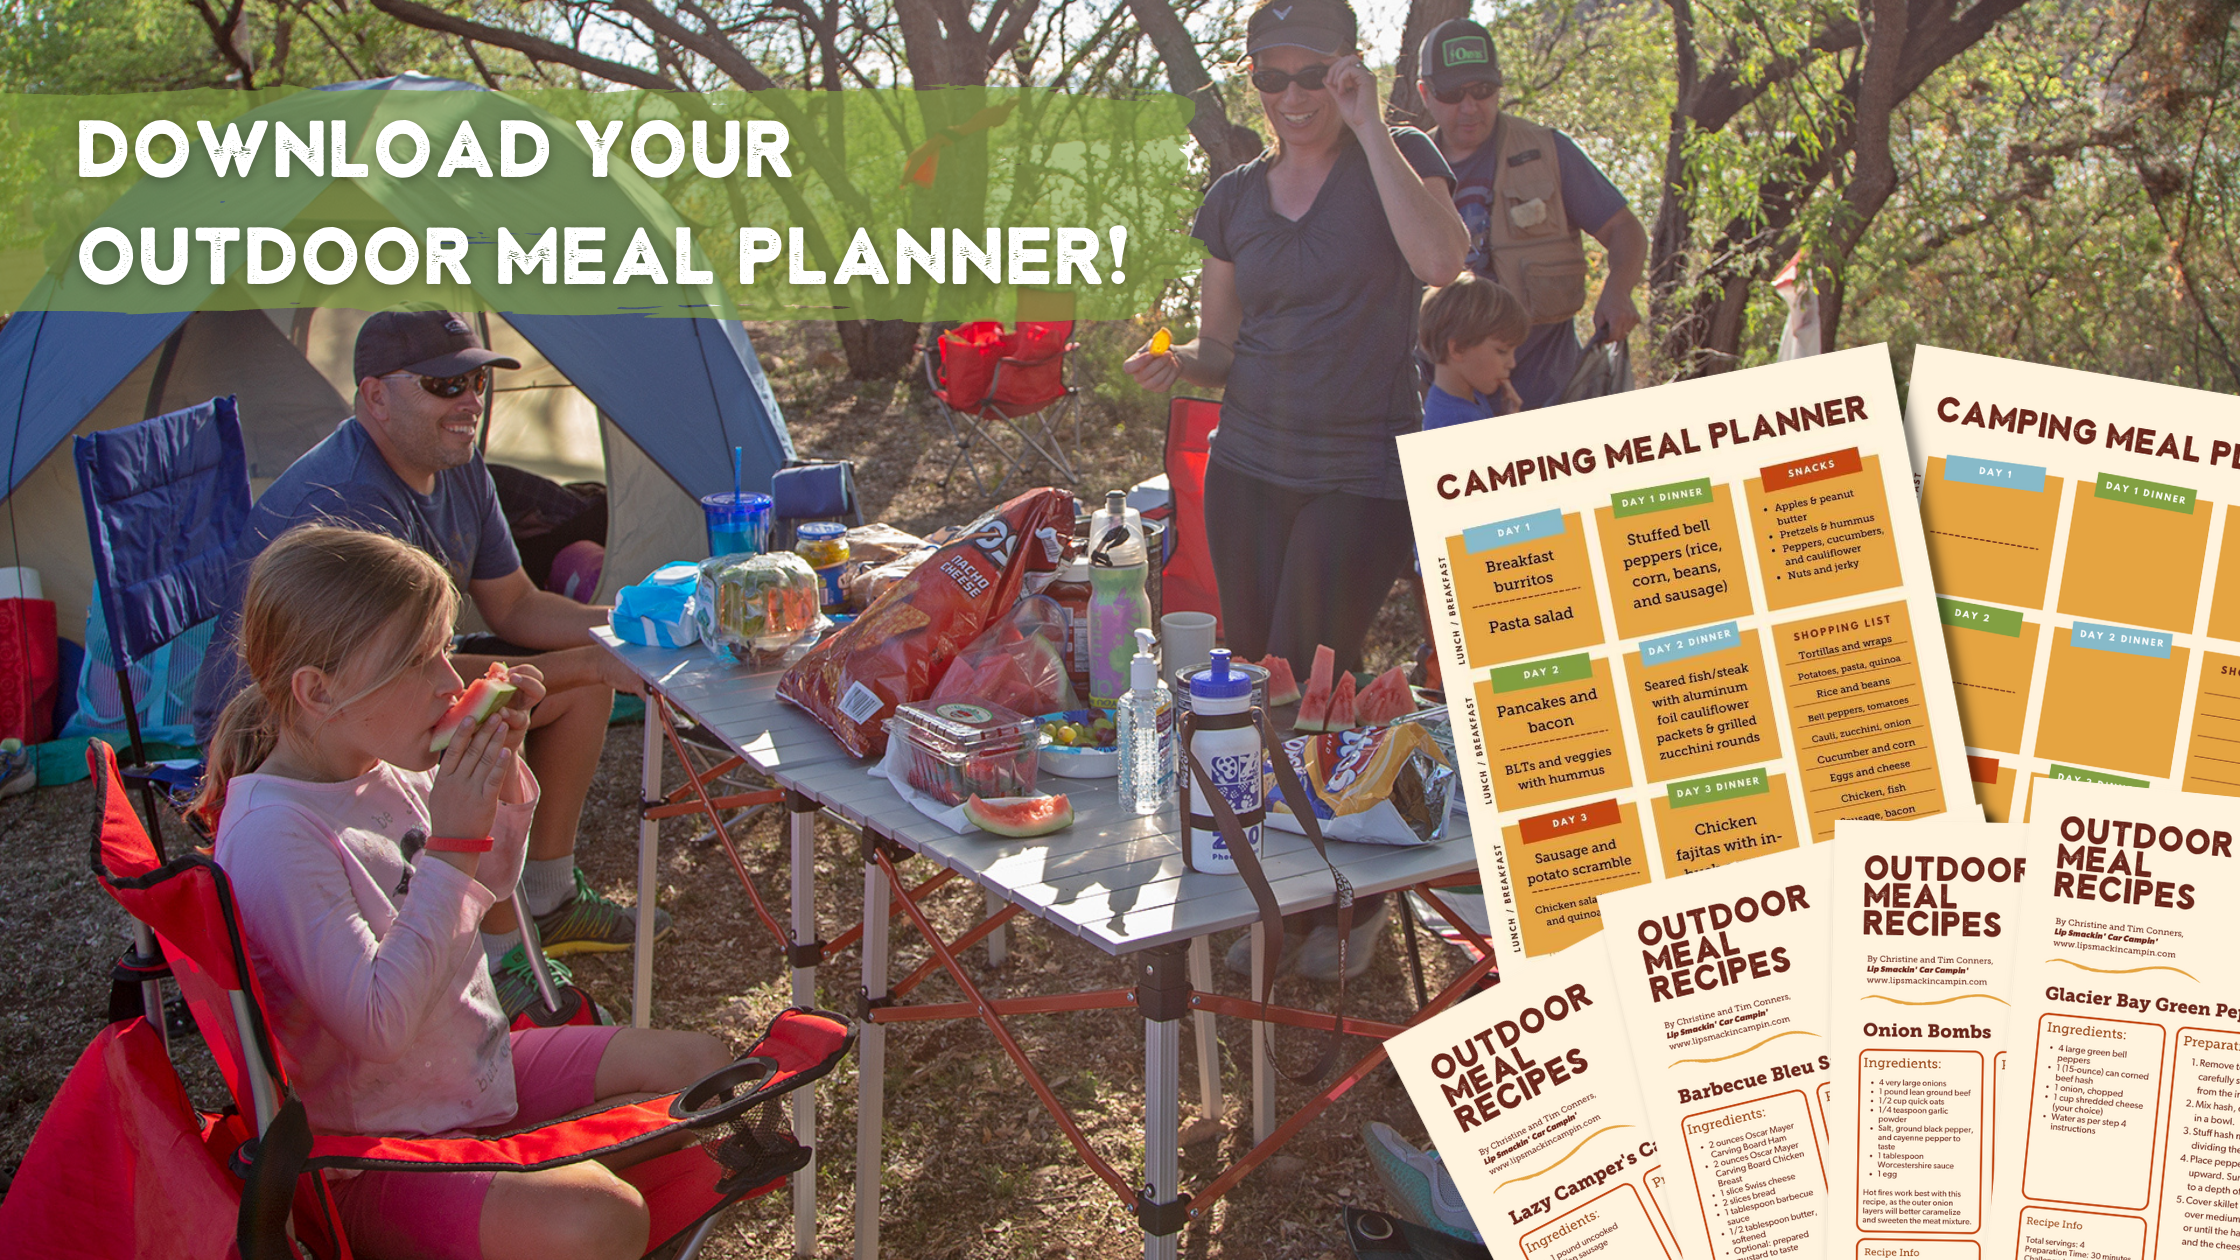 Outdoor meal planner downloadable pdf and camping food recipes